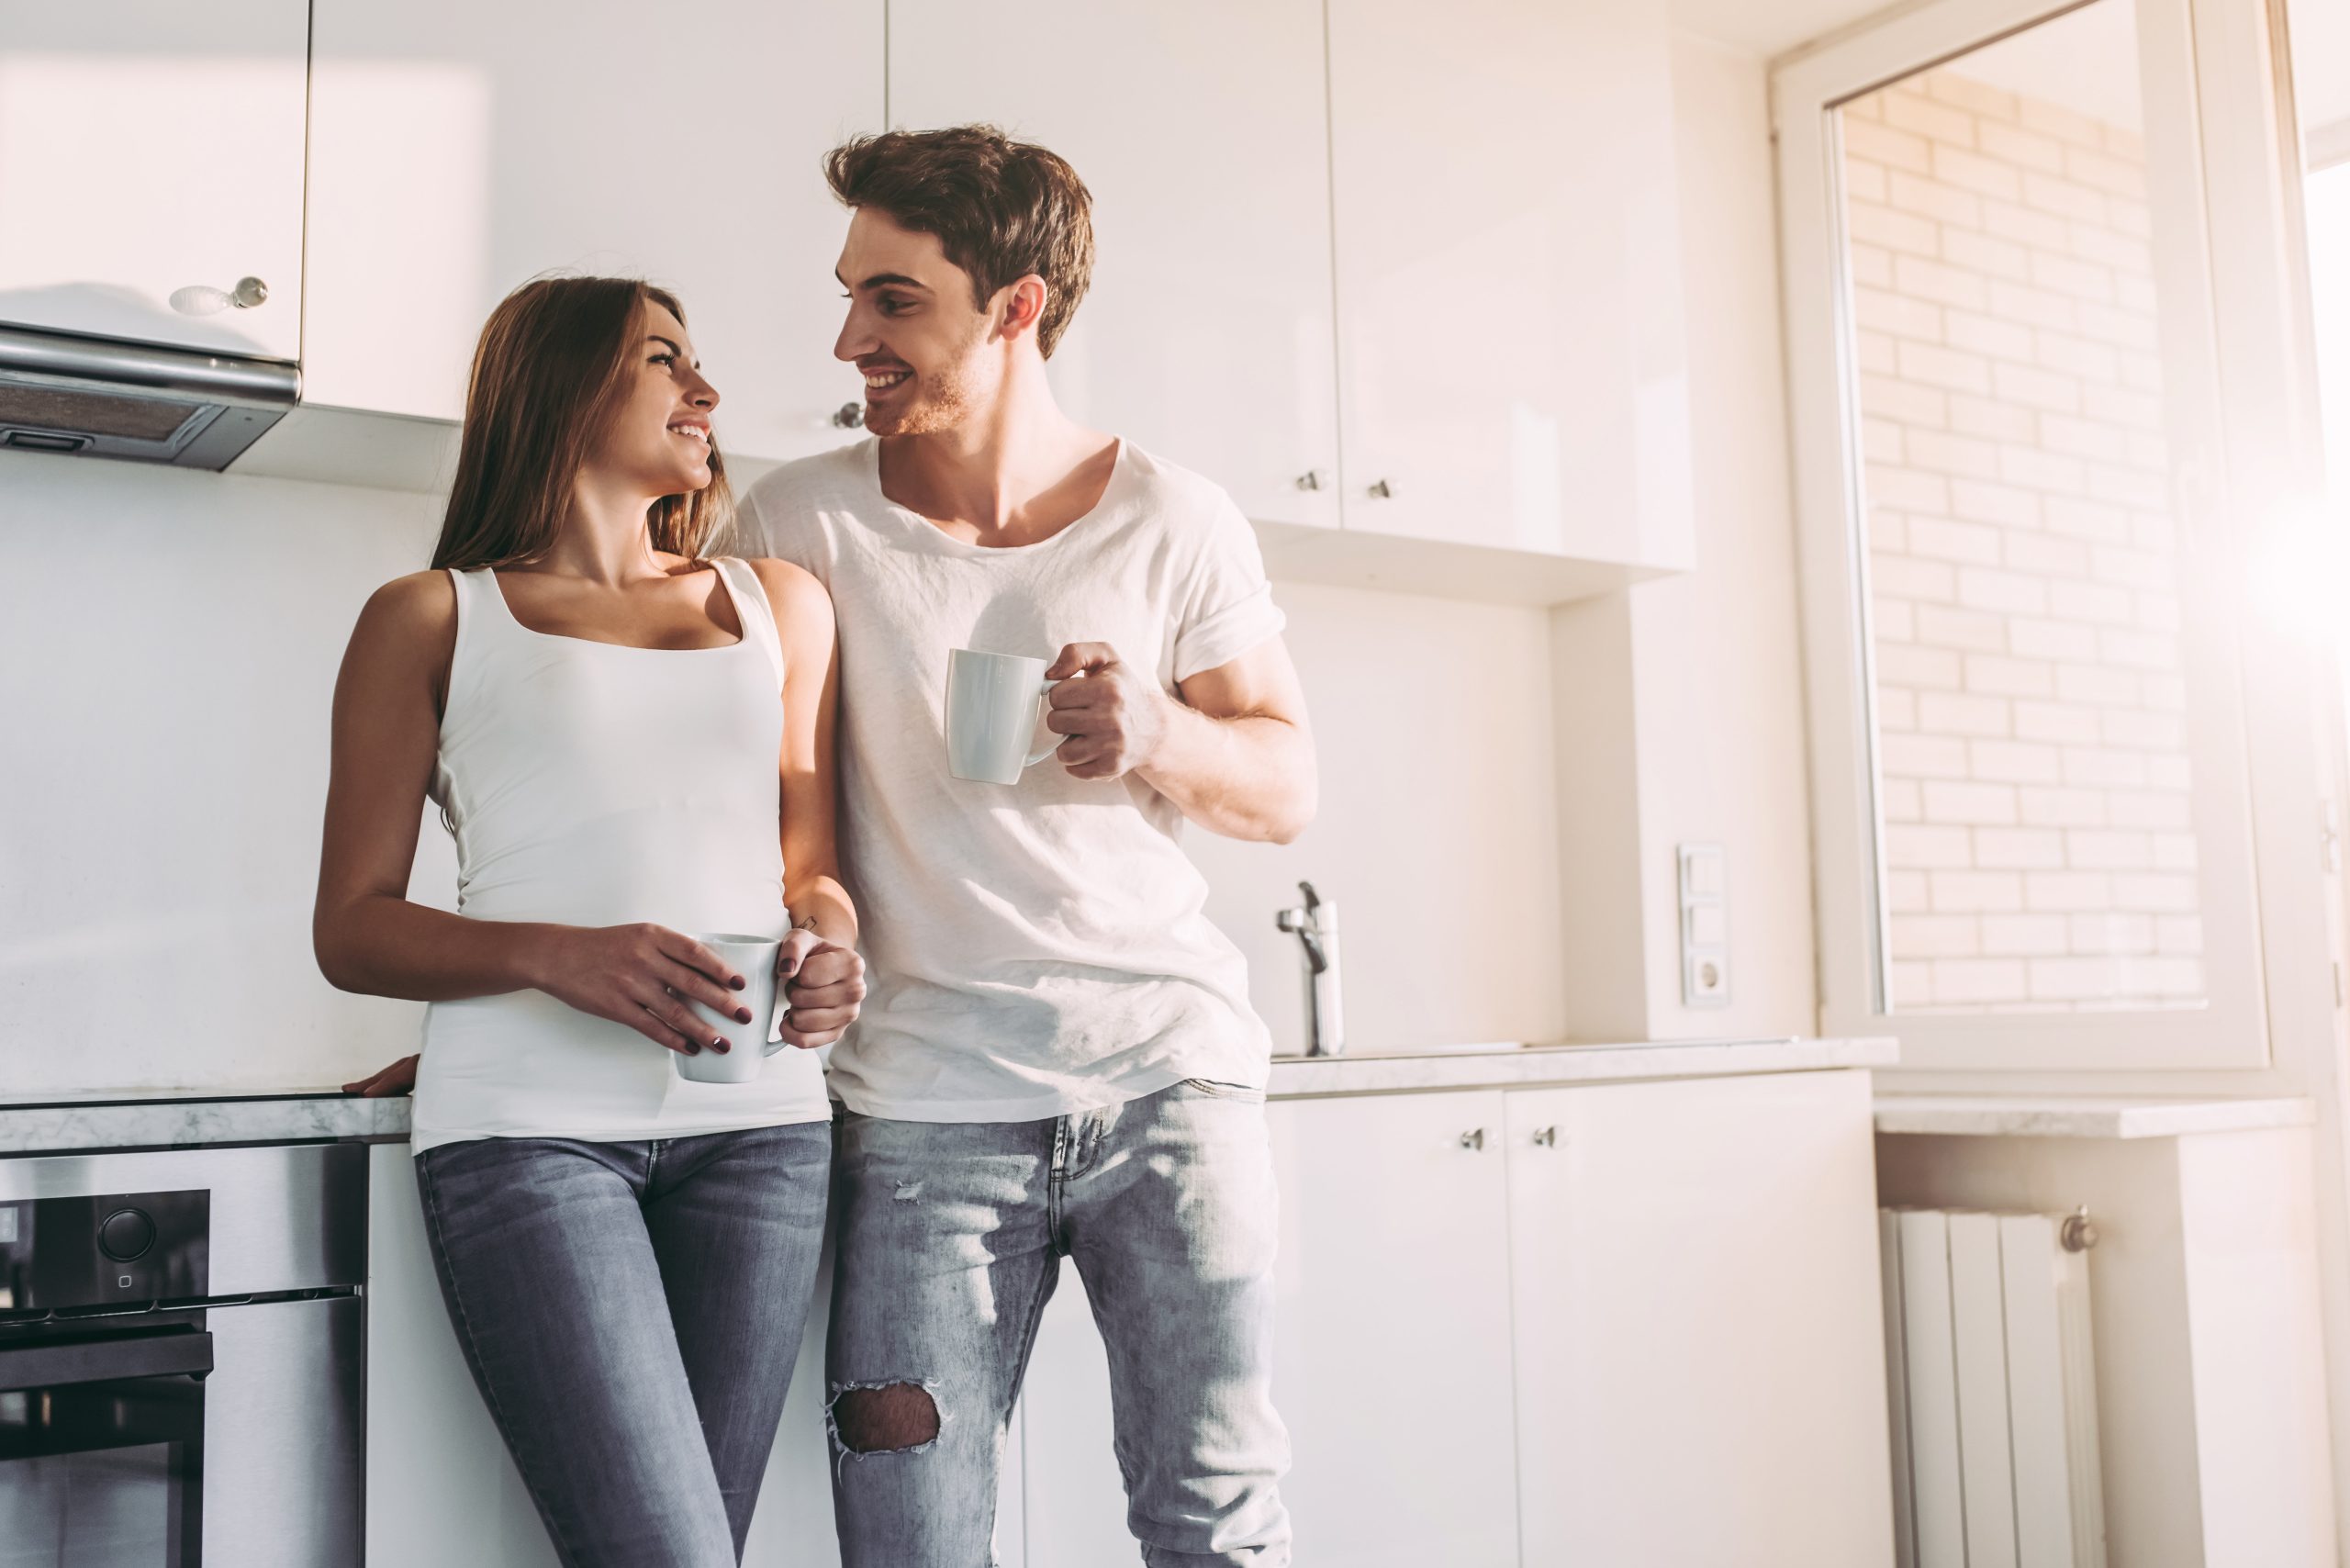 Romantic couple at home. Attractive young woman and handsome man are enjoying spending time together while standing on light modern kitchen with cup of coffee in hands.